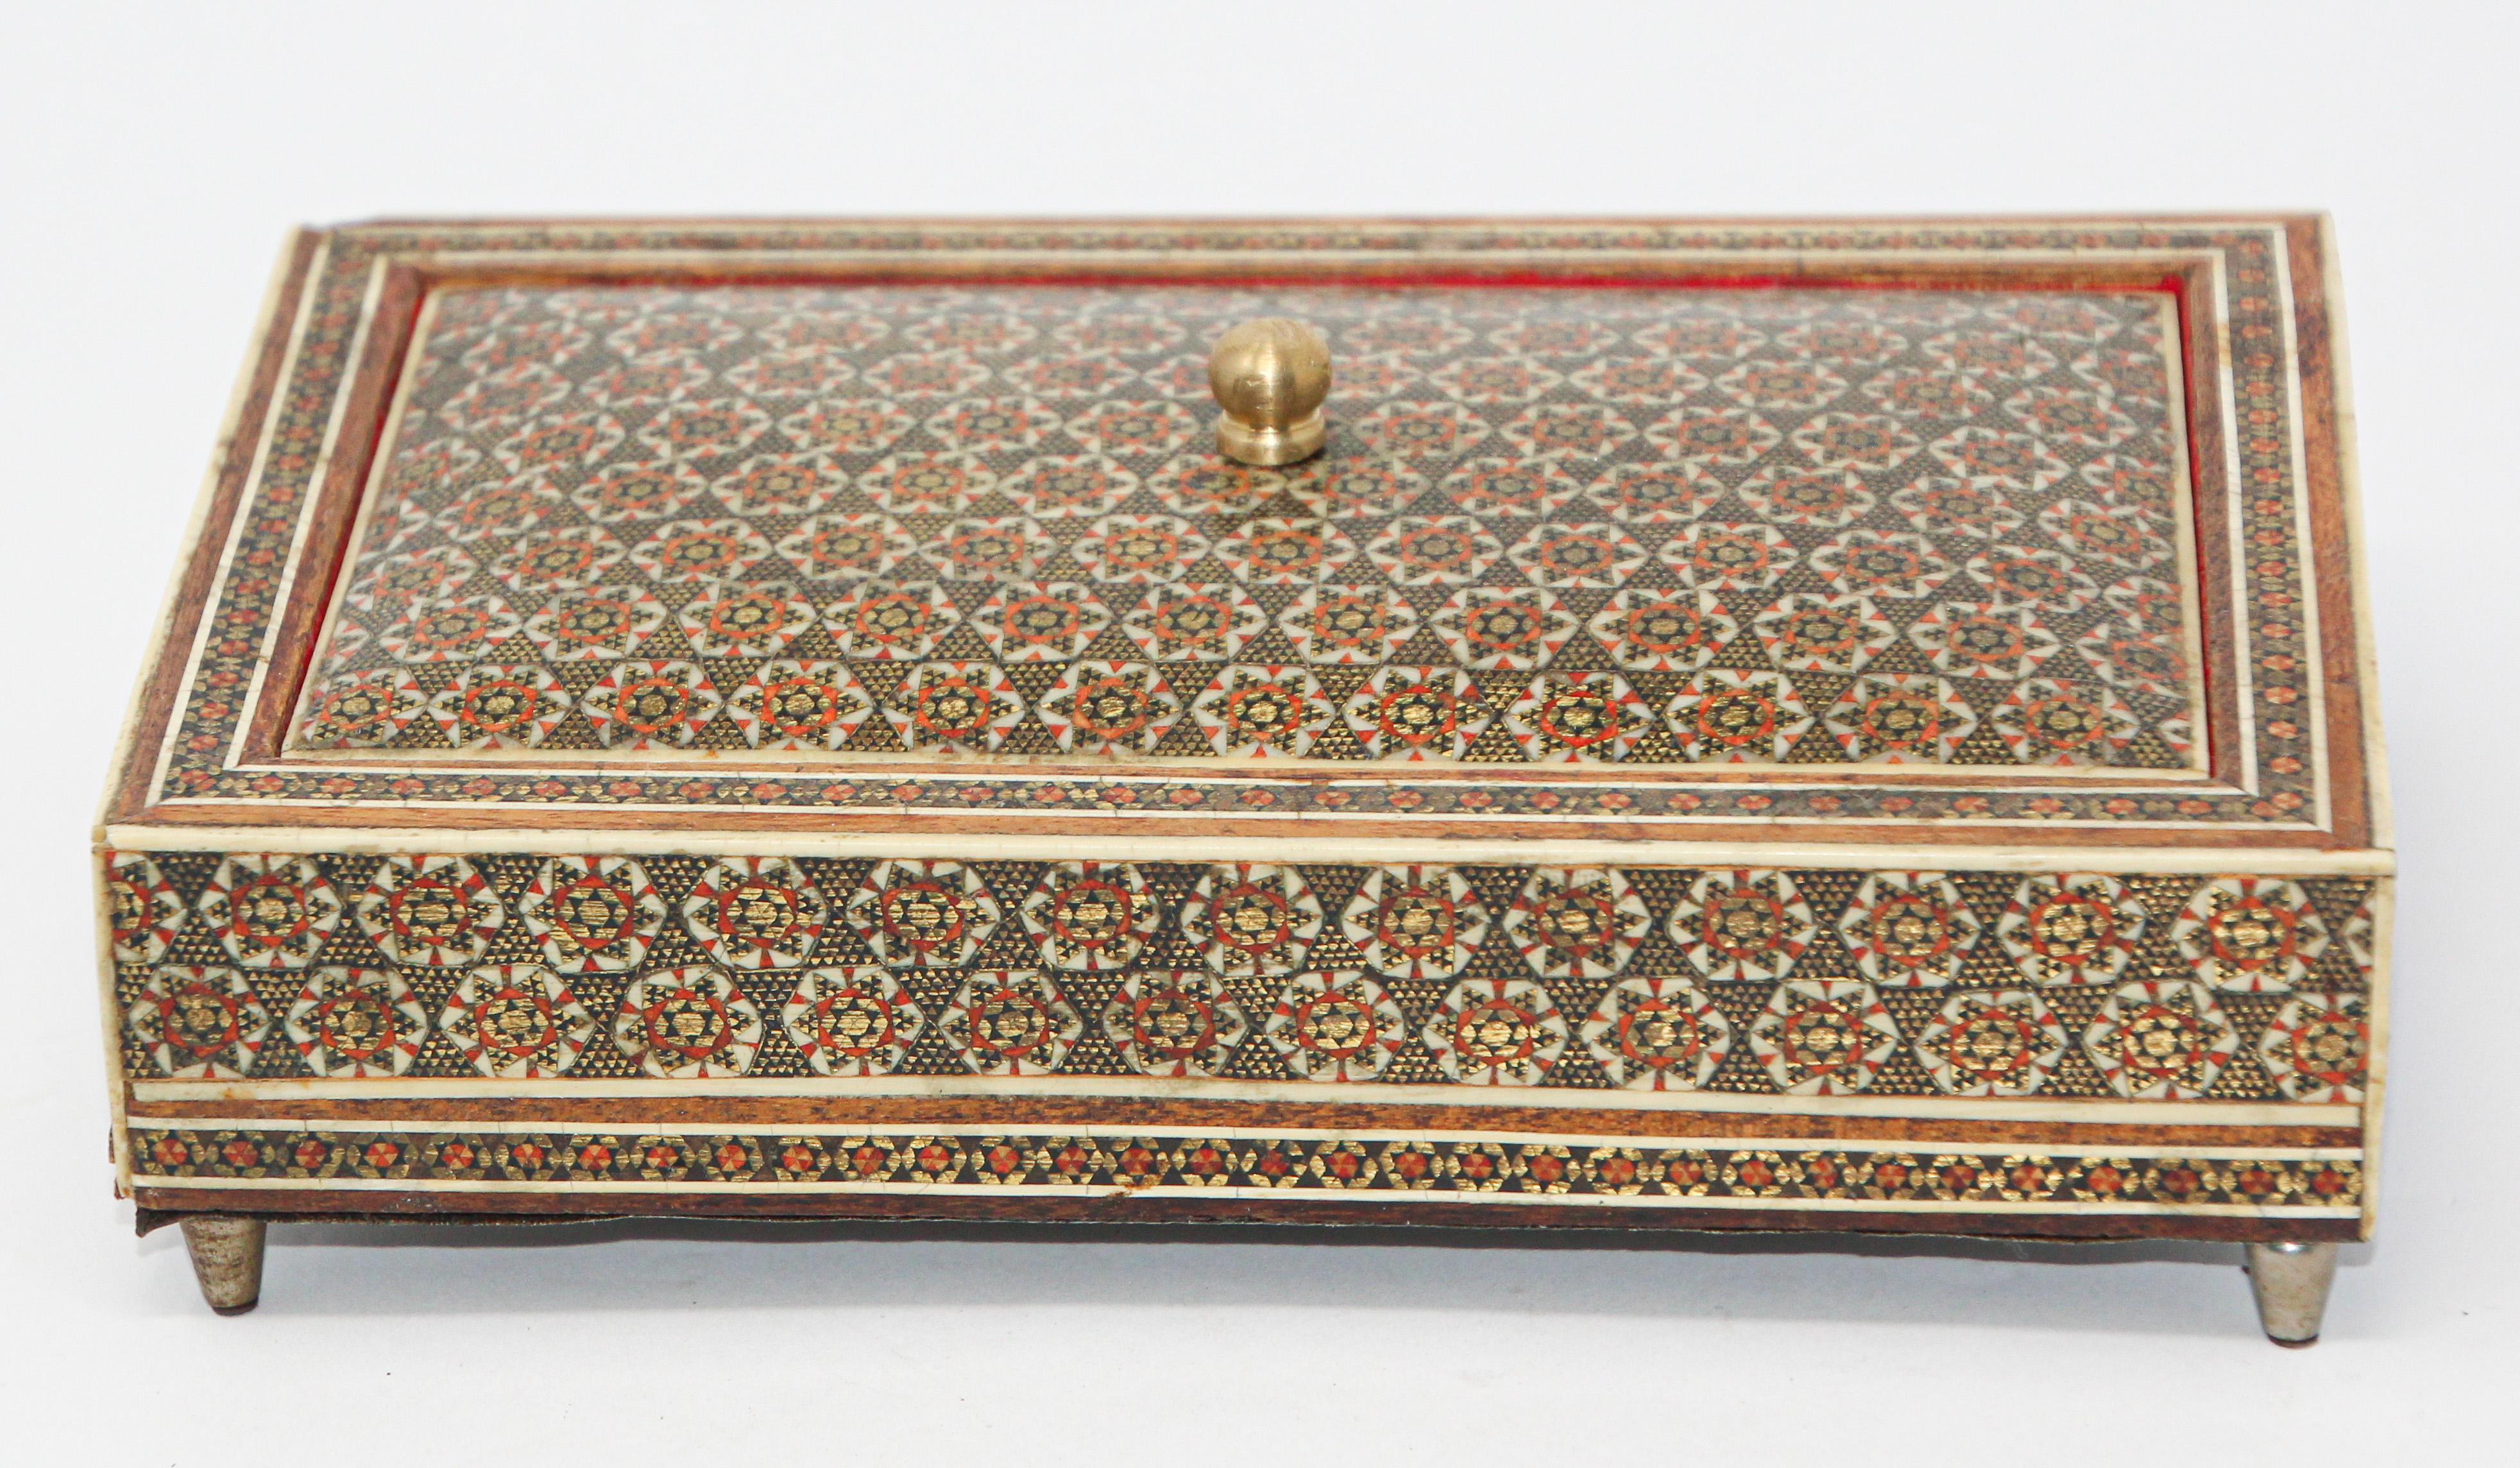 Middle Eastern Sadeli micro mosaic inlaid jewelry footed box with lid.
Intricate inlaid box with floral and geometric Moorish design.
Sadeli micro mosaic designs in mosaic marquetry, very fine artwork.
Lined with red velvet and glass, top final and